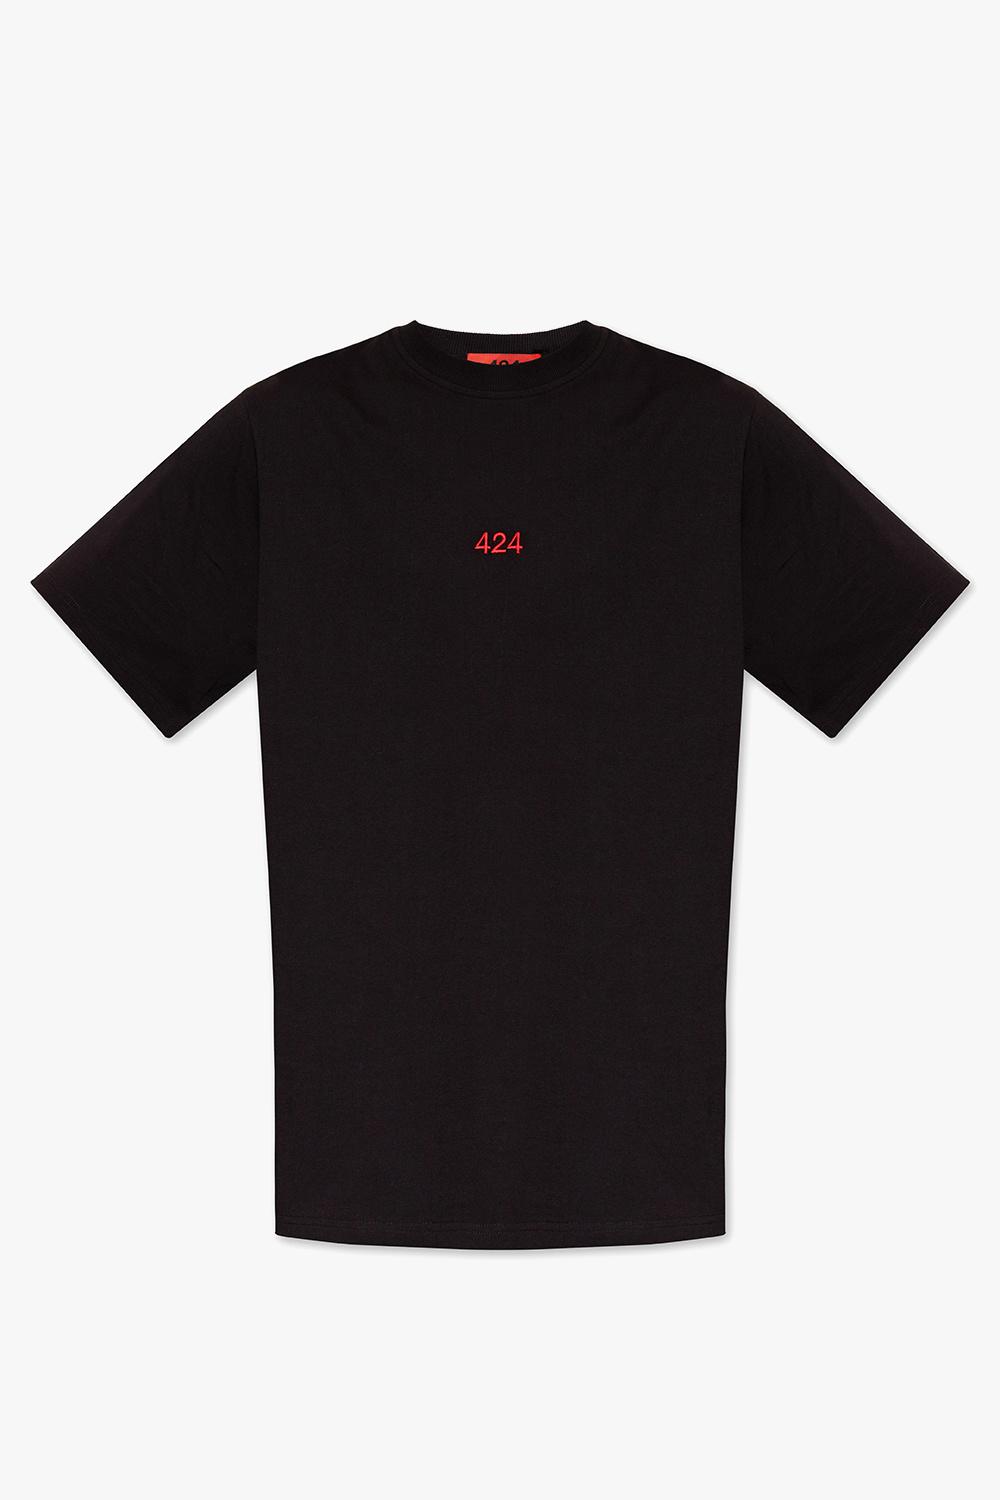 424 T-shirt with logo